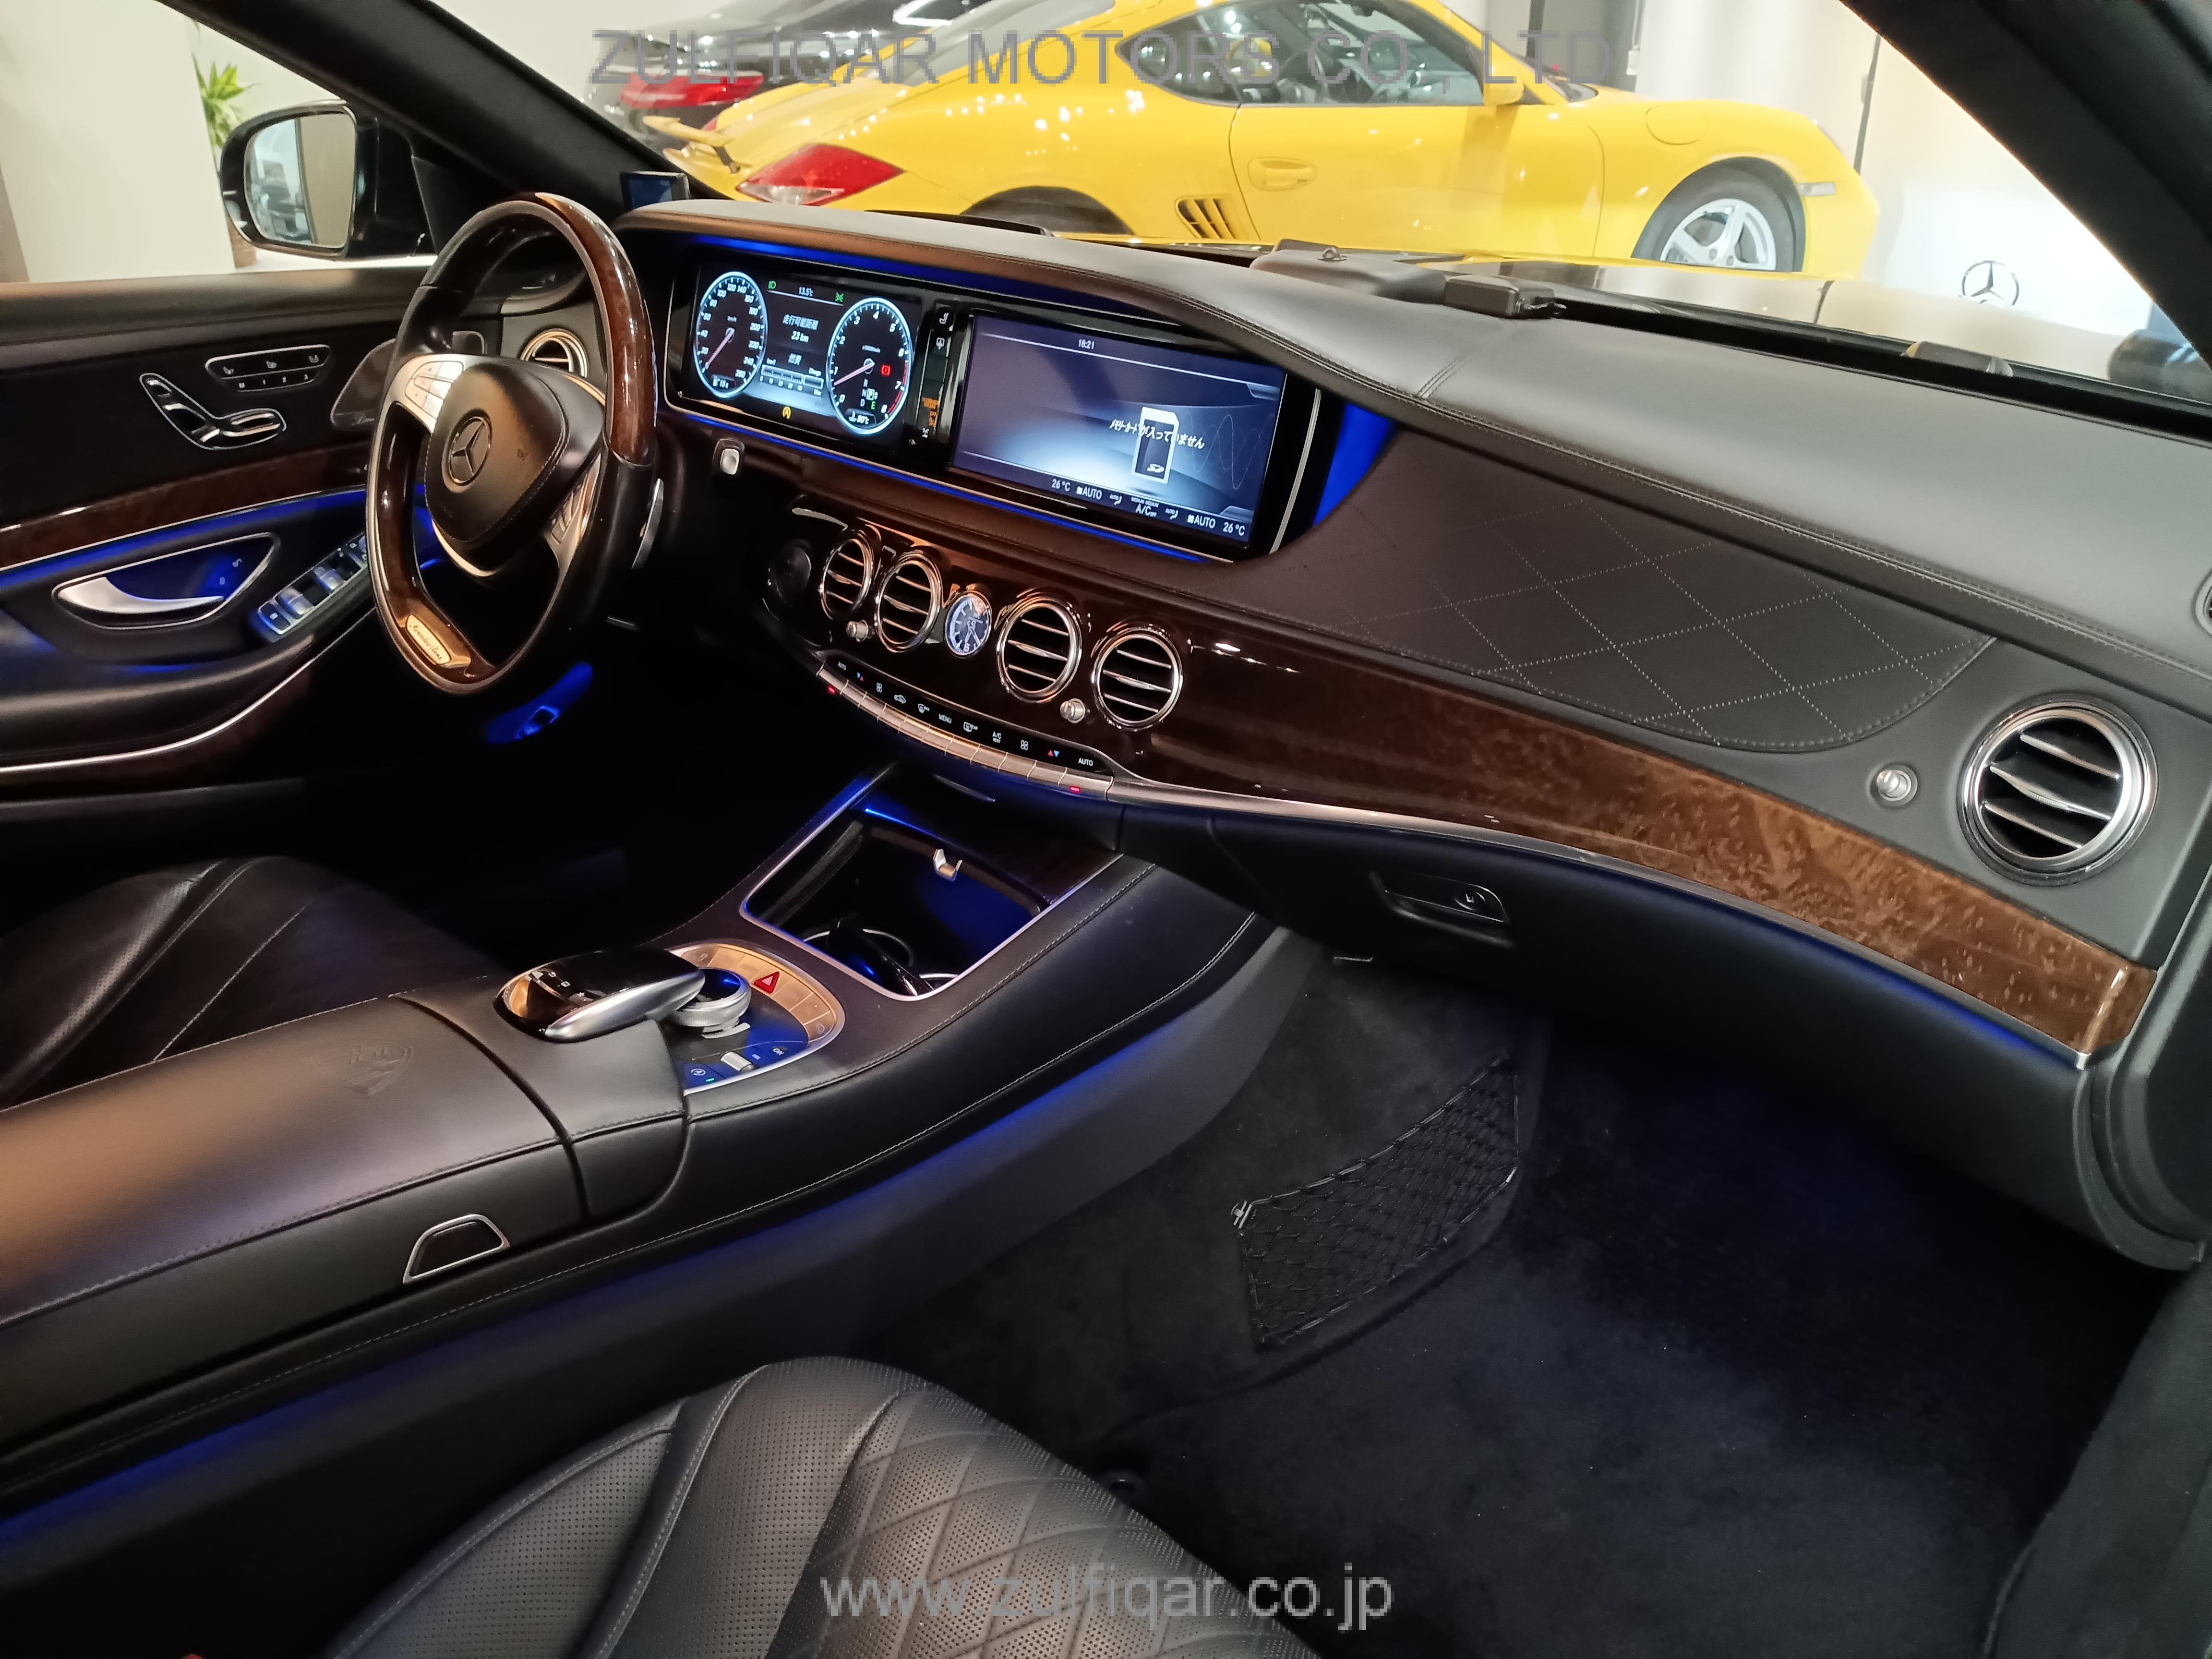 MERCEDES MAYBACH S CLASS 2015 Image 34